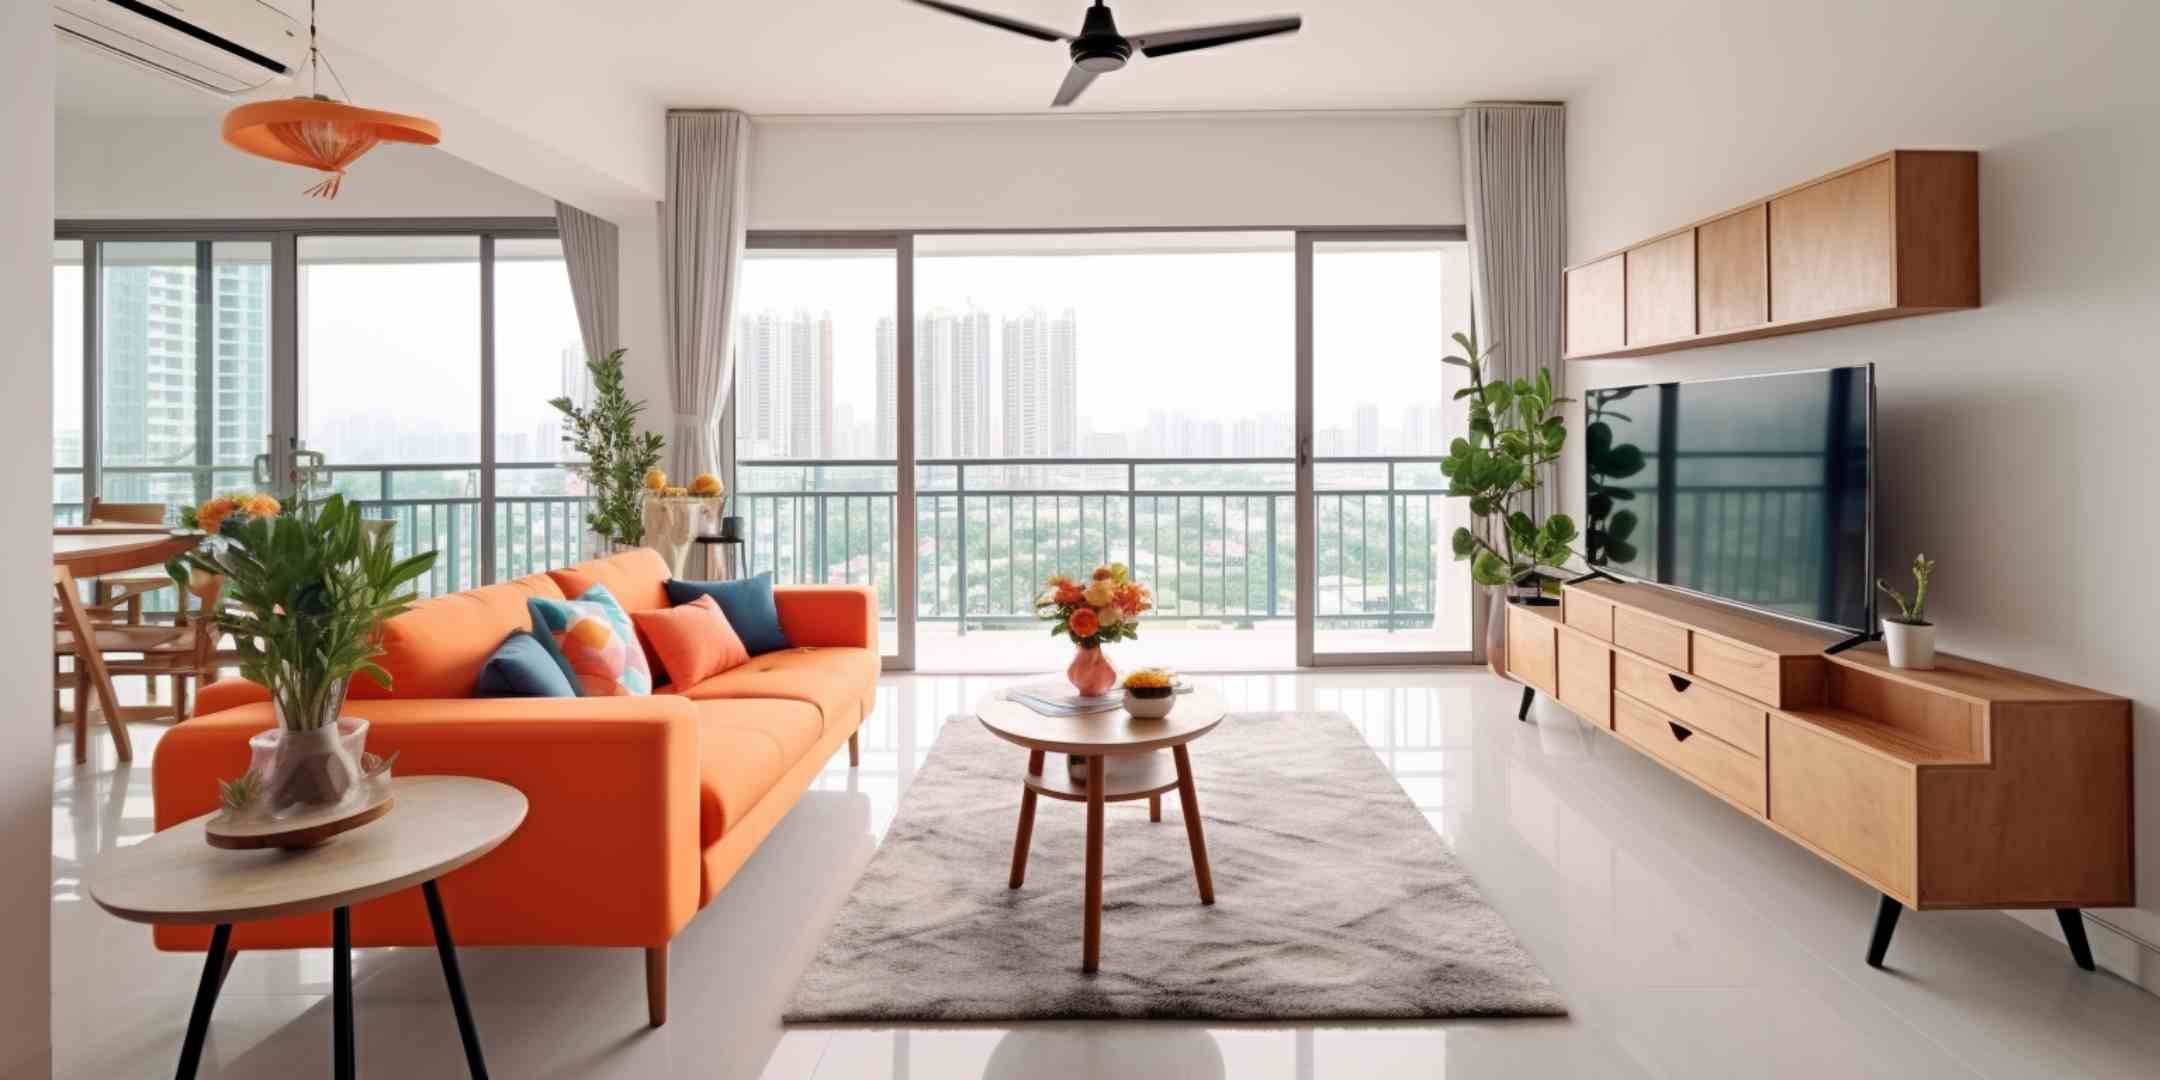 8 Amazing HDB Bedroom Design With Study Table Ideas For Your Home